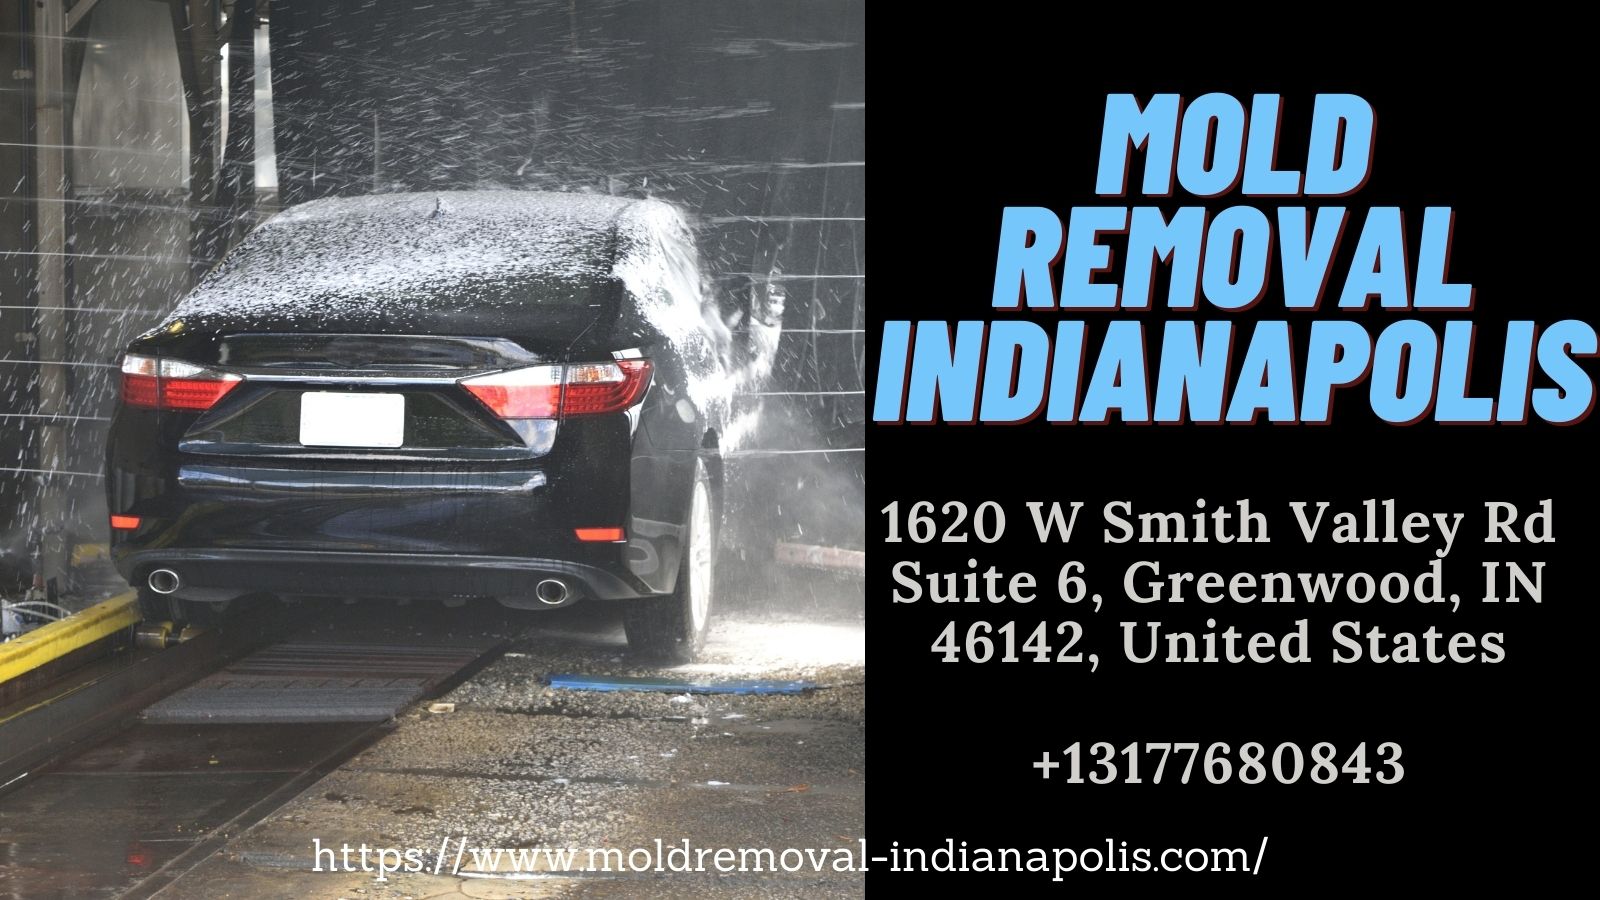 Mold Removal Indianapolis Car mold removal